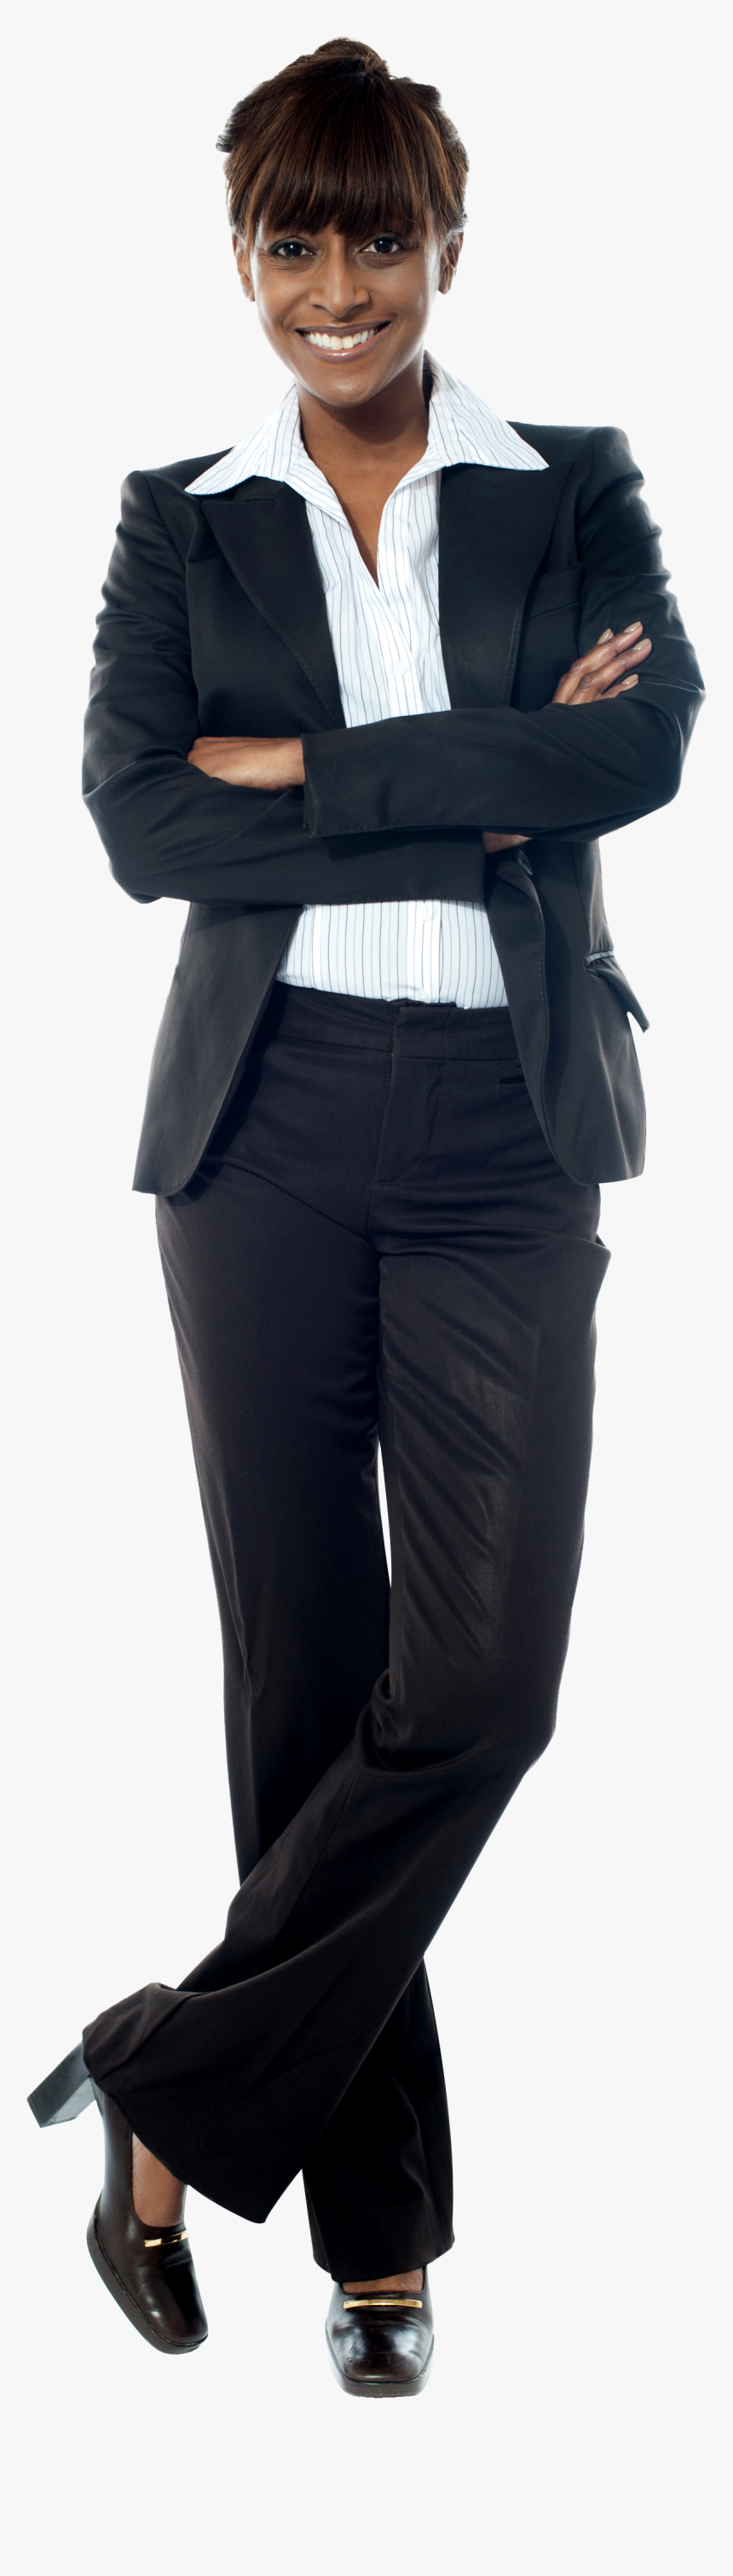 Business Women - Business Professional Women, HD Png Download, Free Download